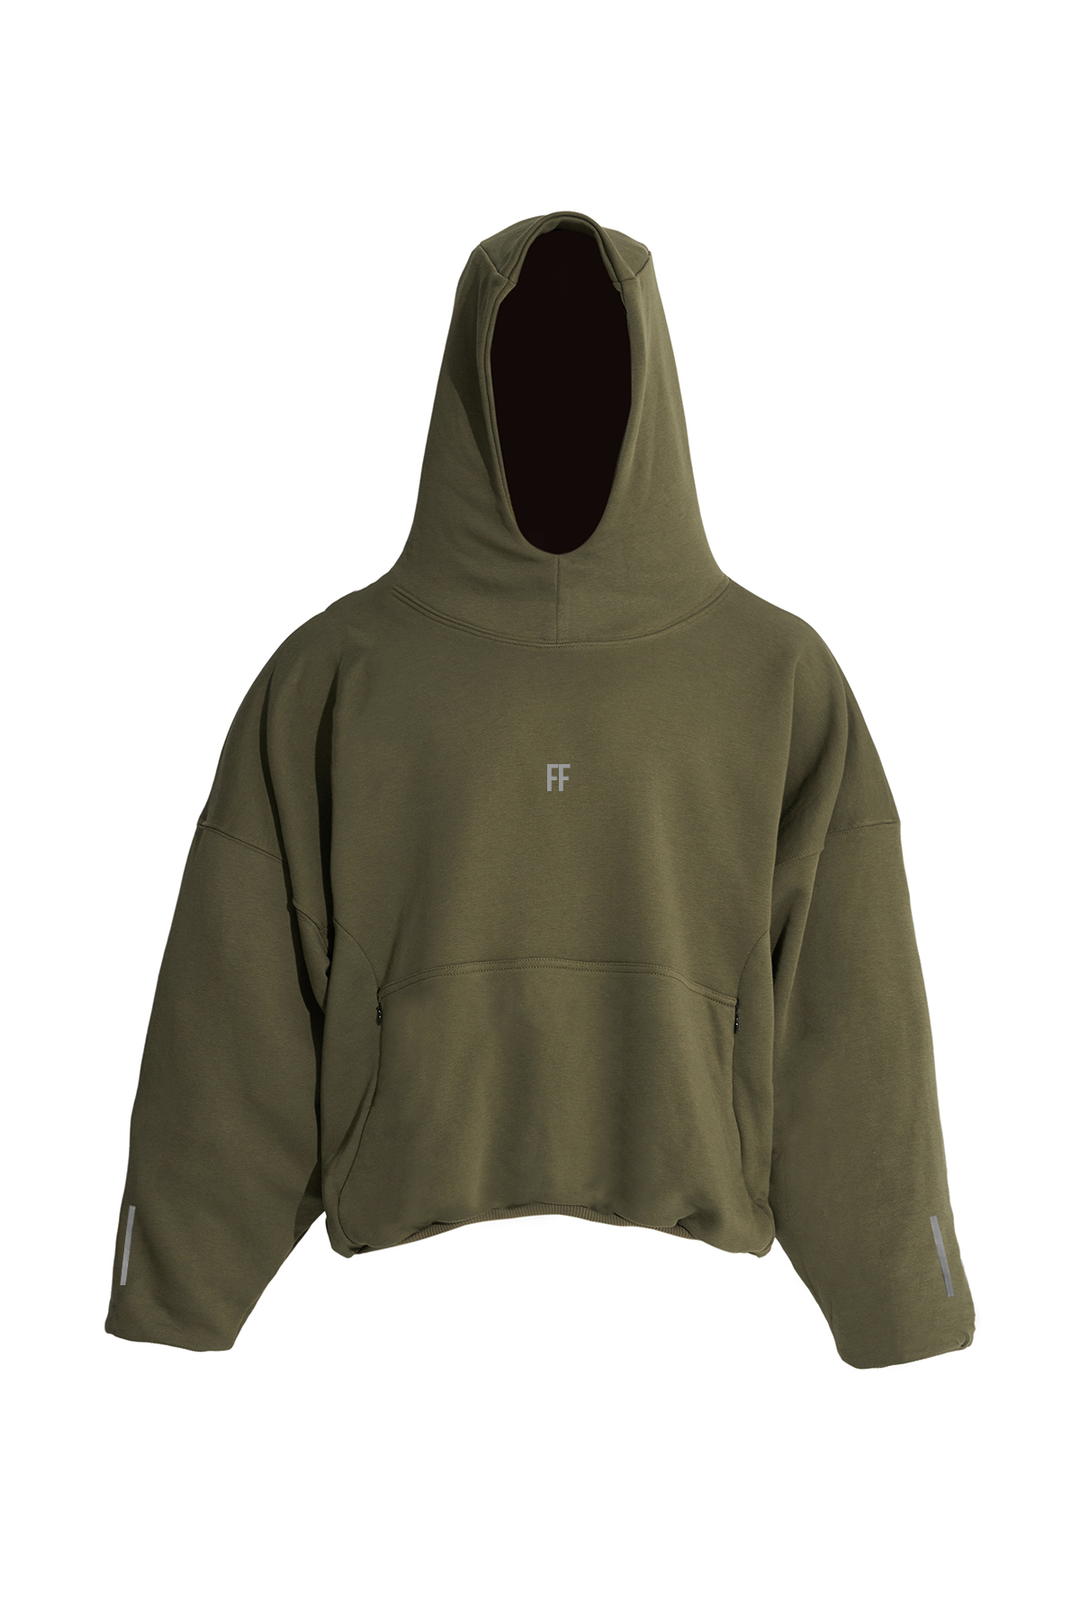 Reflective FF / Oversized Double Layer Pullover Hoodie